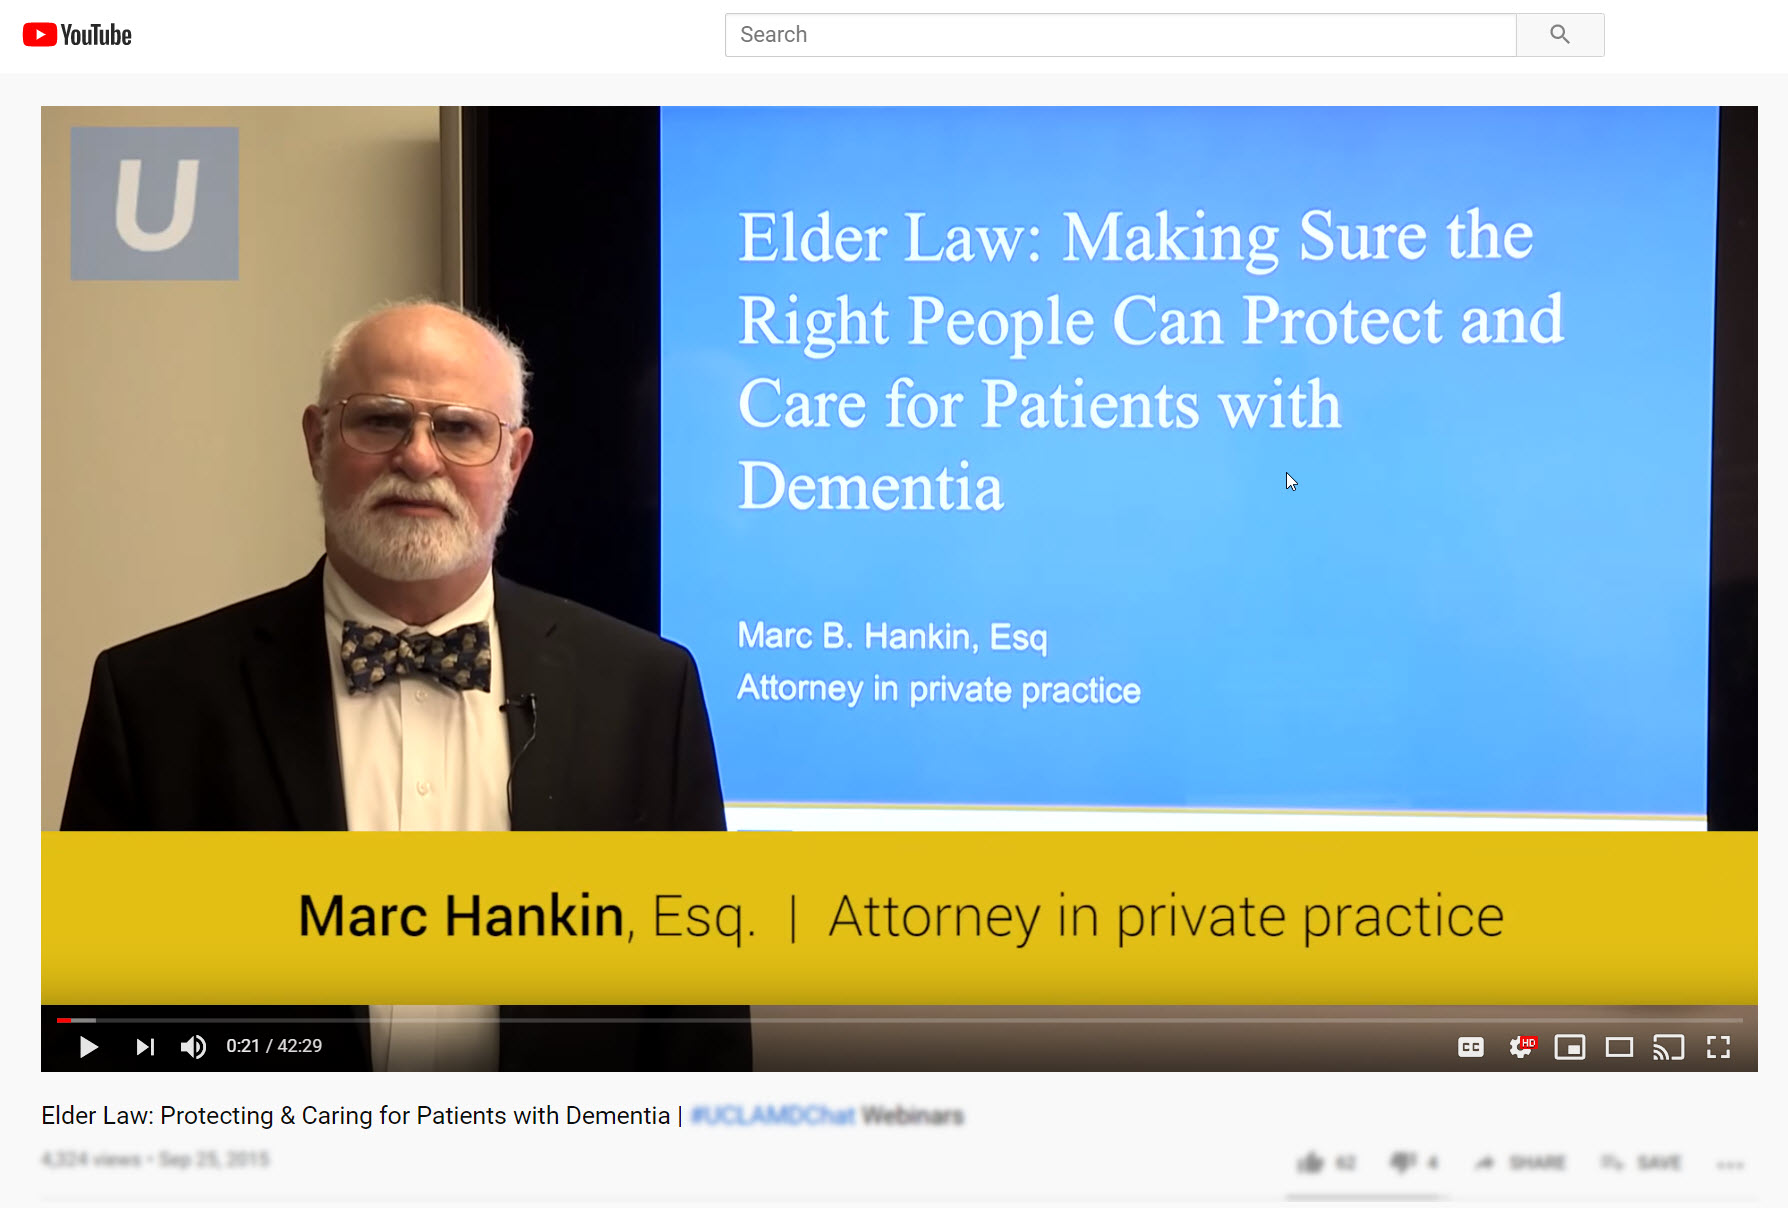 Elder Law: Protecting & Caring for Patients with Dementia